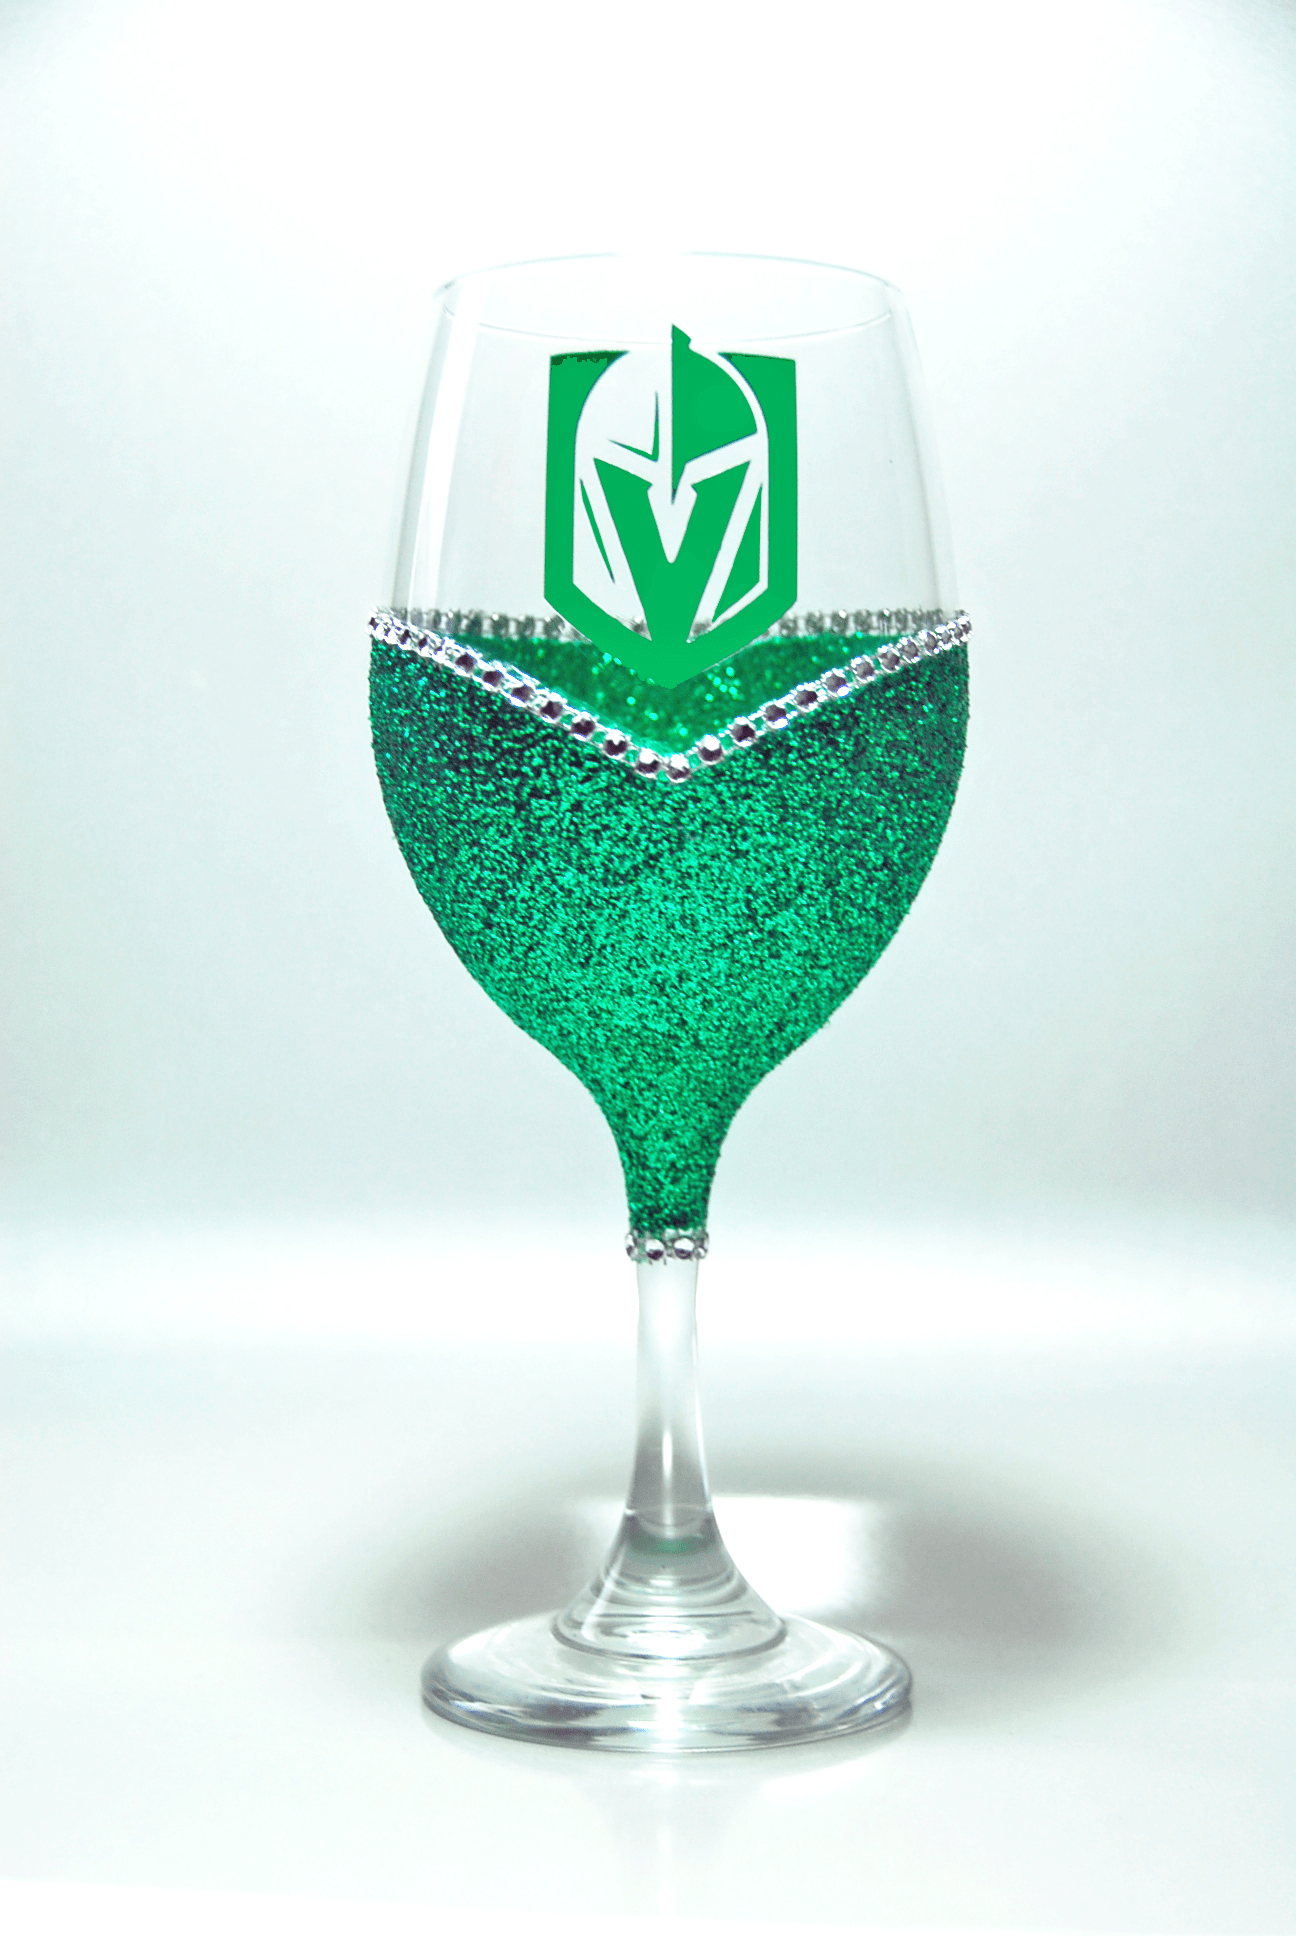 Candles Green- Silver Rhinestones-Green Logo-Stem Winey Bitches Co LV Golden Knights "Bling" Convertible Candle Glass Set -Choose your color WineyBitchesCo